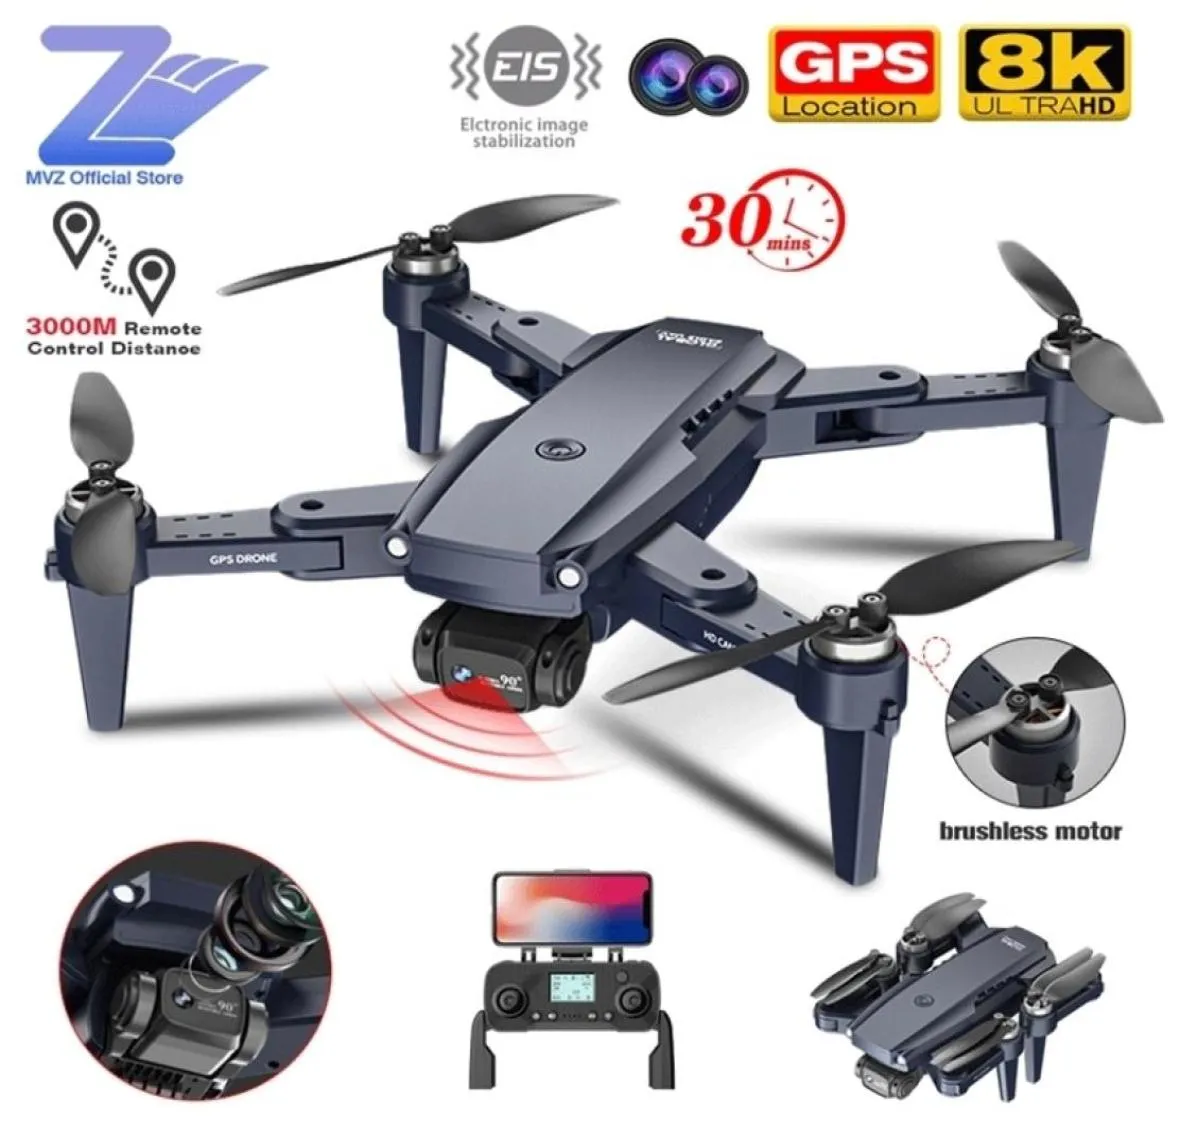 MVZ Visual Ostacle Evitanti DRONE 4K Profesional 6K HD Dual Camera Brushless Motore GPS Foldcopter Helicopter RC 220216570323